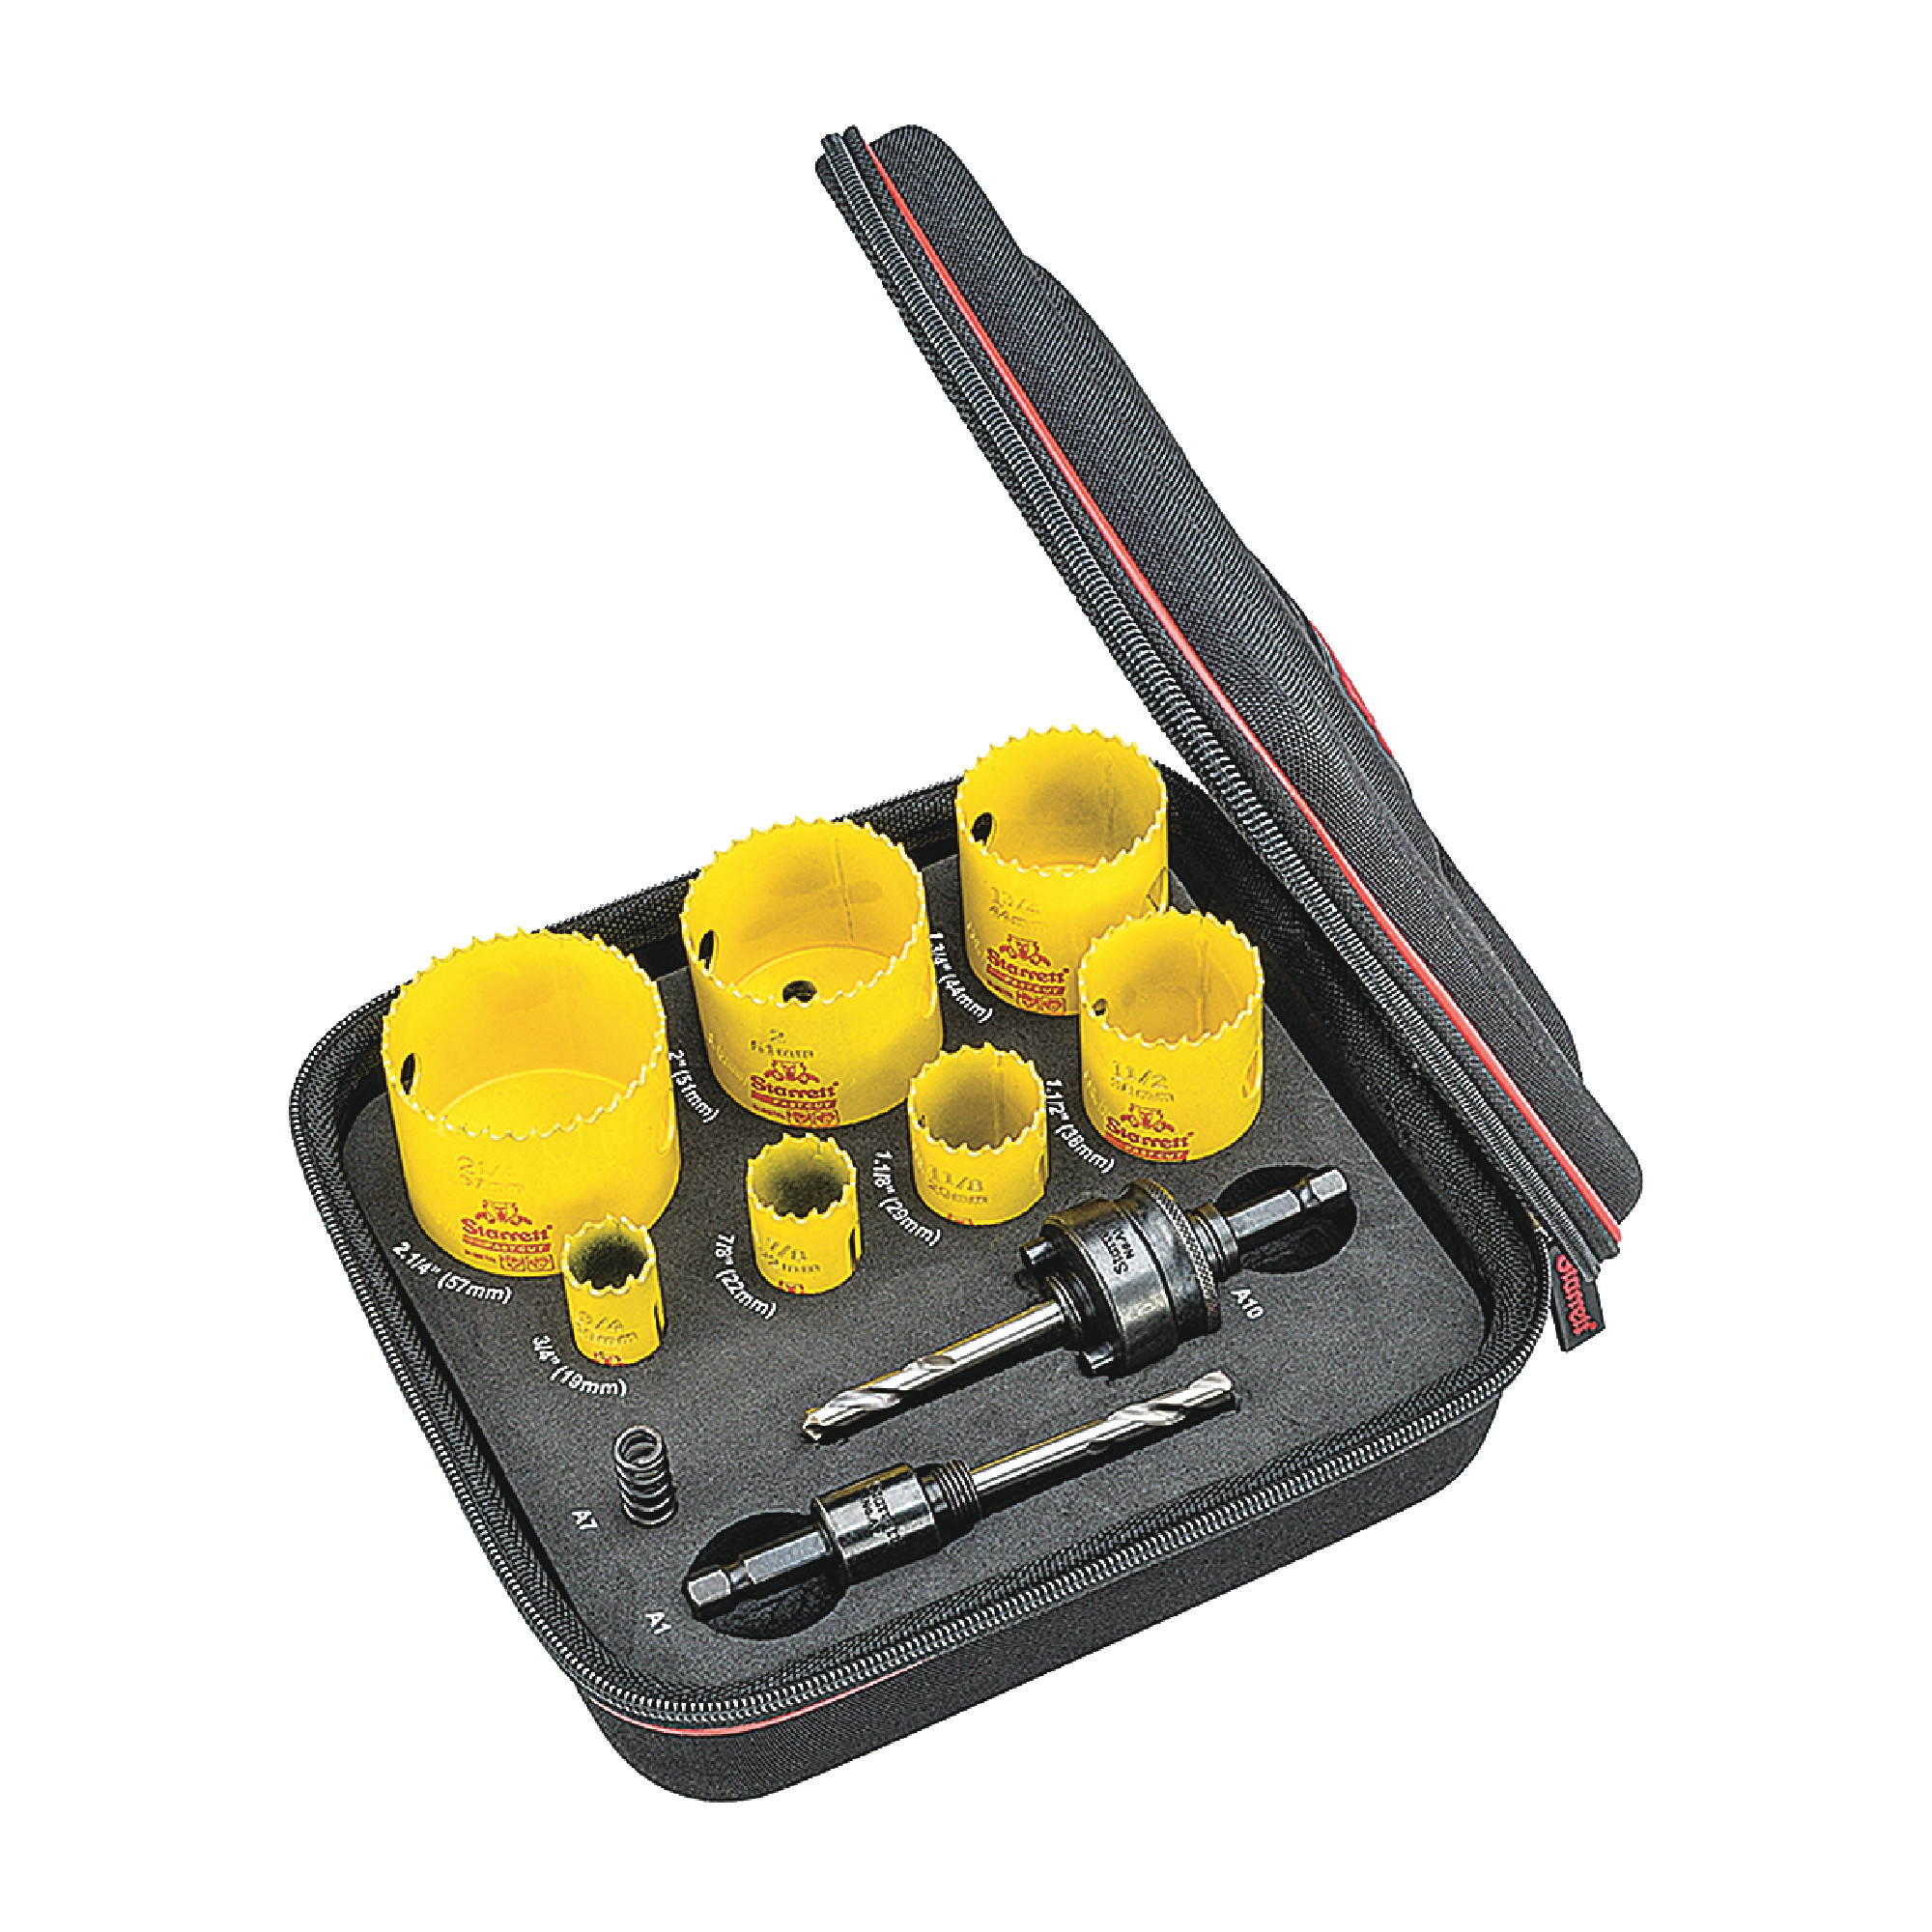 Starrett KFC07031-N FCH Plumbers Set With 7 Hoe Saws and 3 Accessories